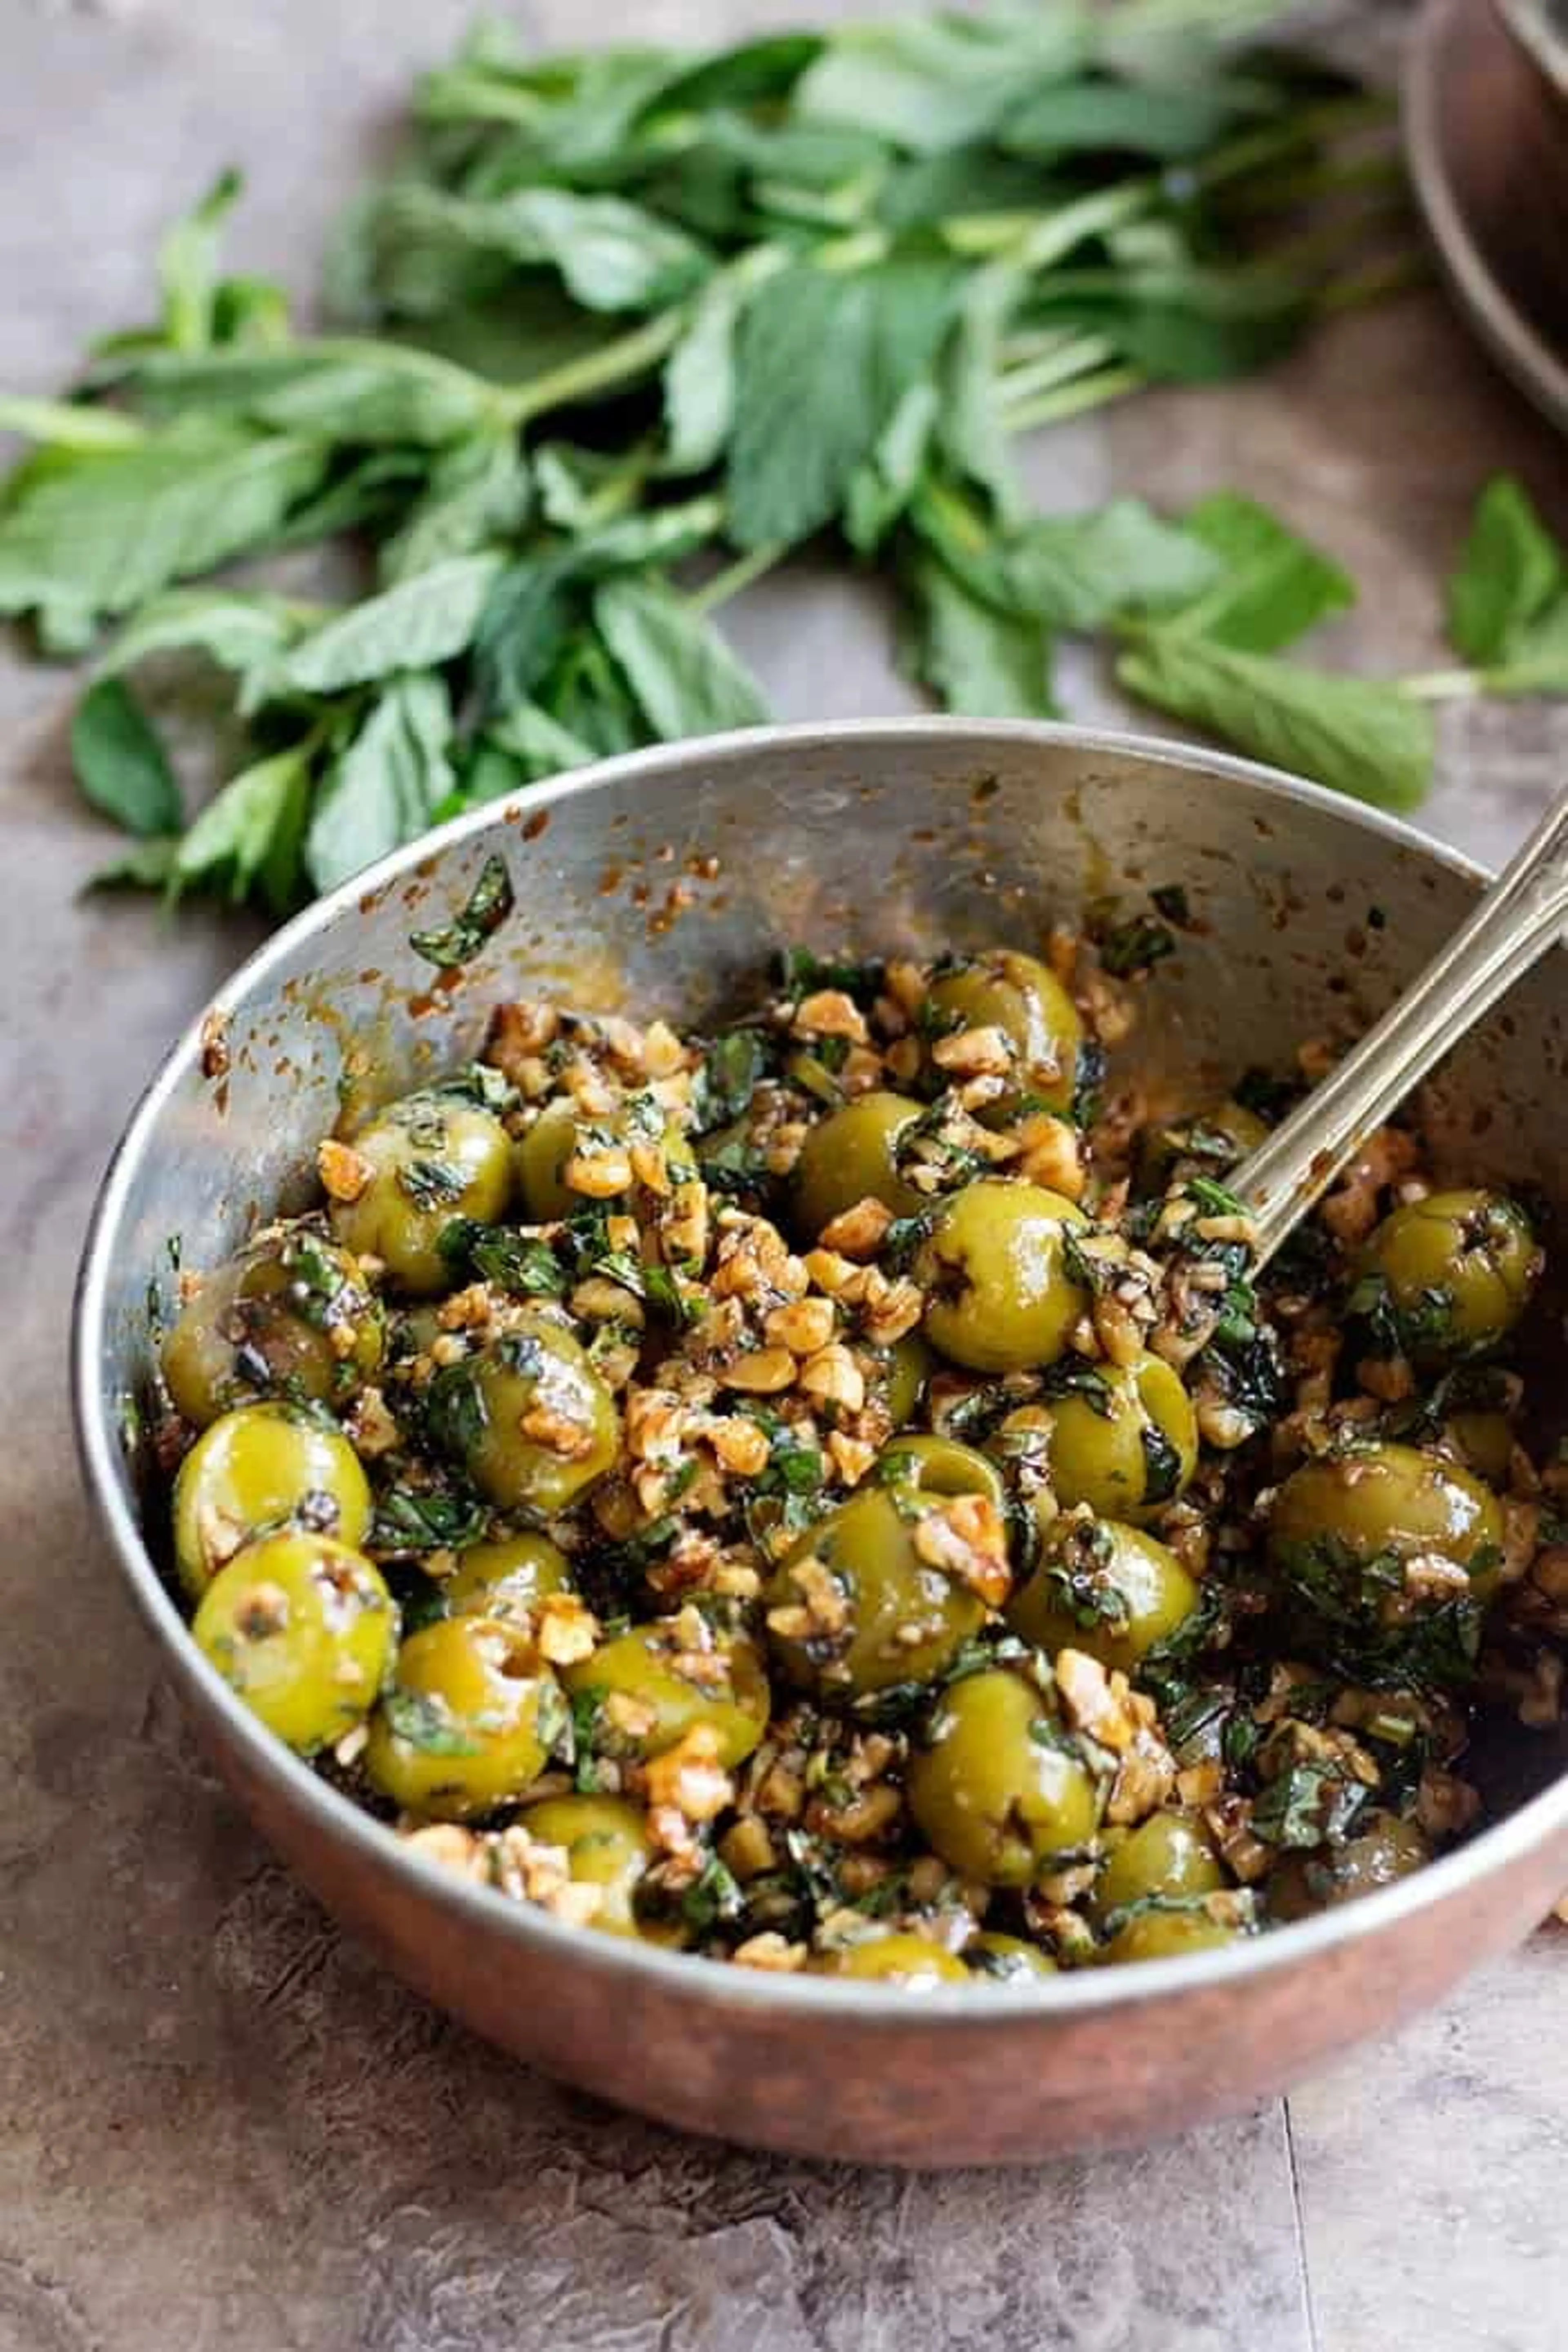 Marinated Olives with Walnuts